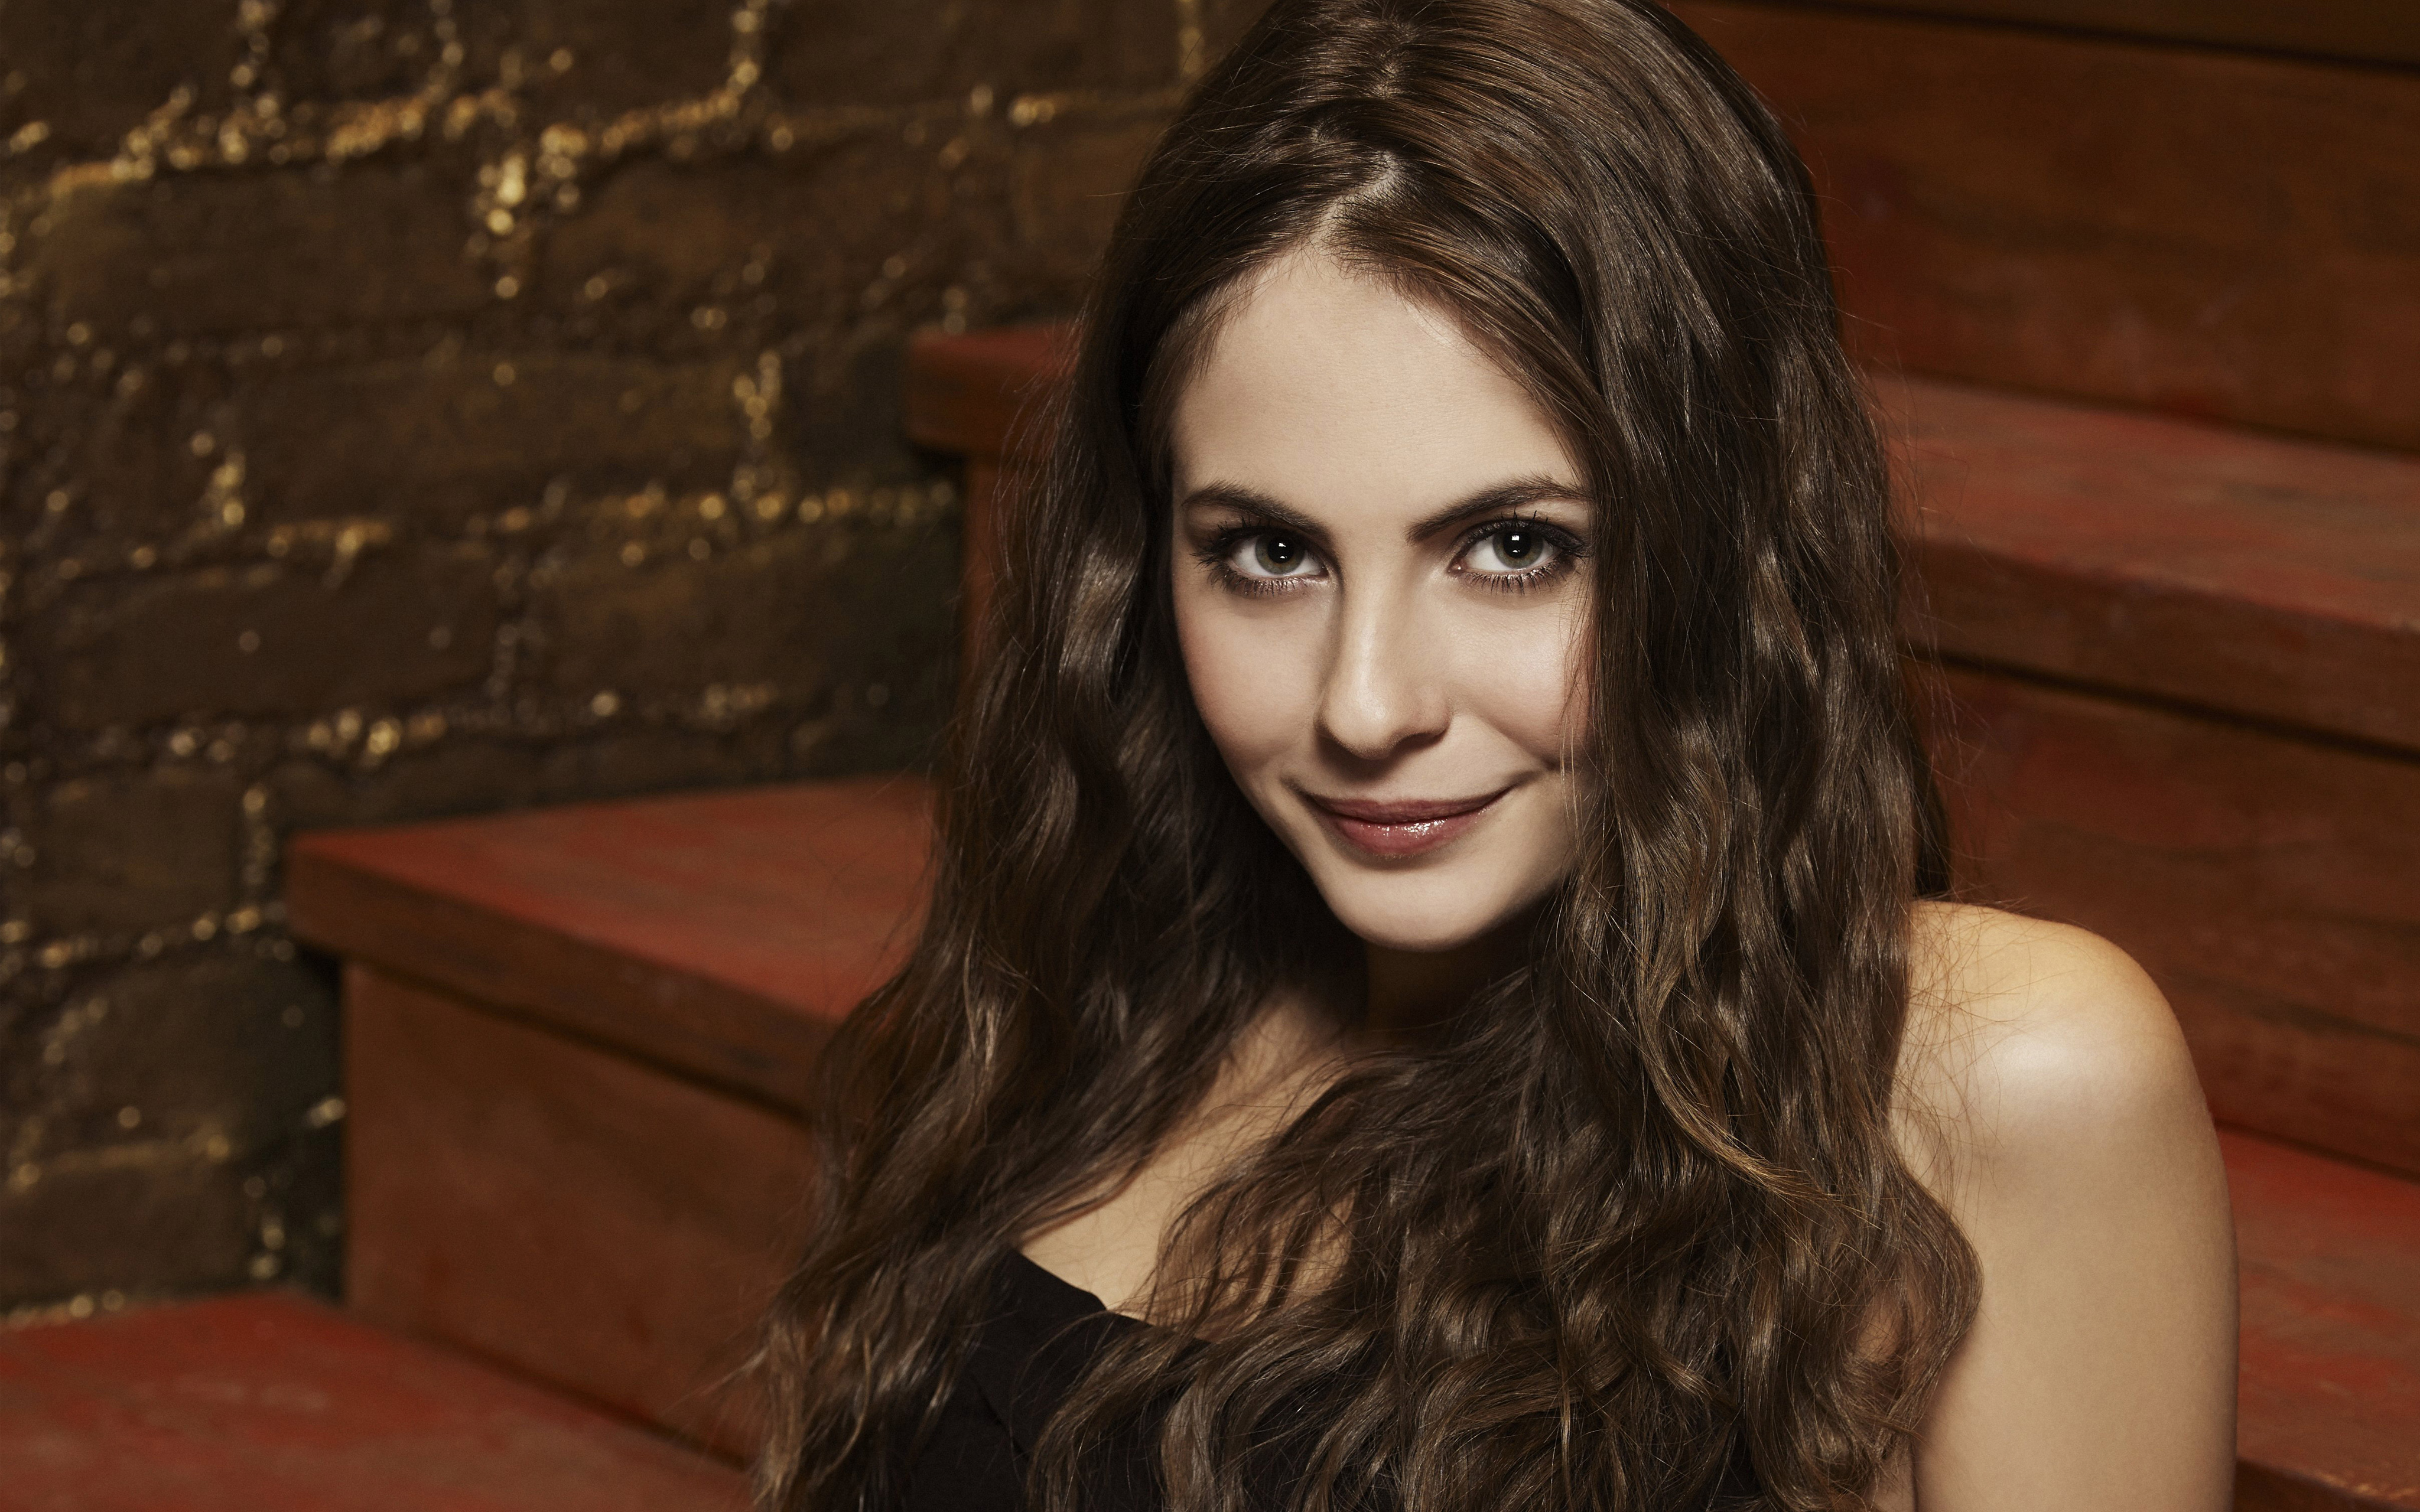 willa holland, celebrity, actress, american, brunette, face, green eyes, smile